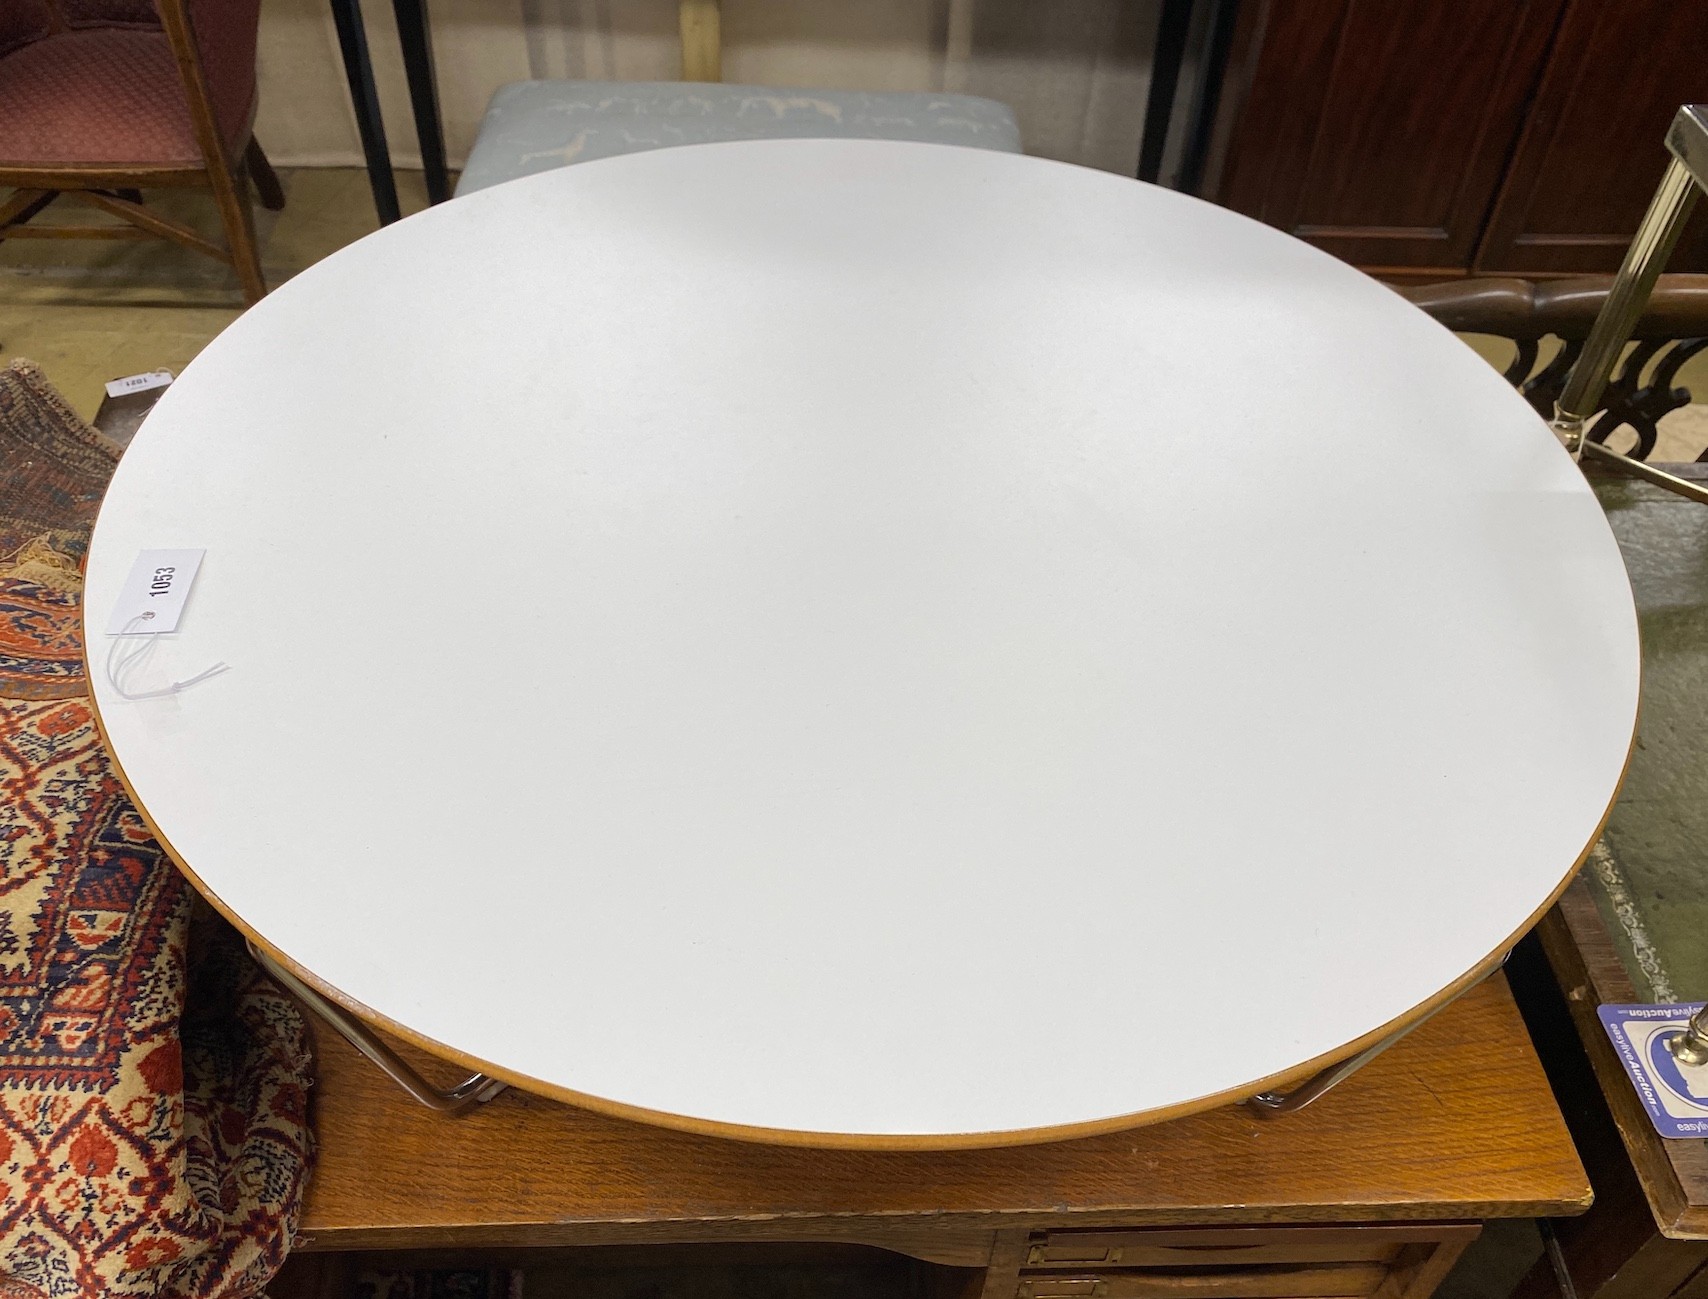 A contemporary Allermuir circular conic style table by Luke Pearson and Tom Lloyd (R.S.A), diameter 89cm, height 31cm